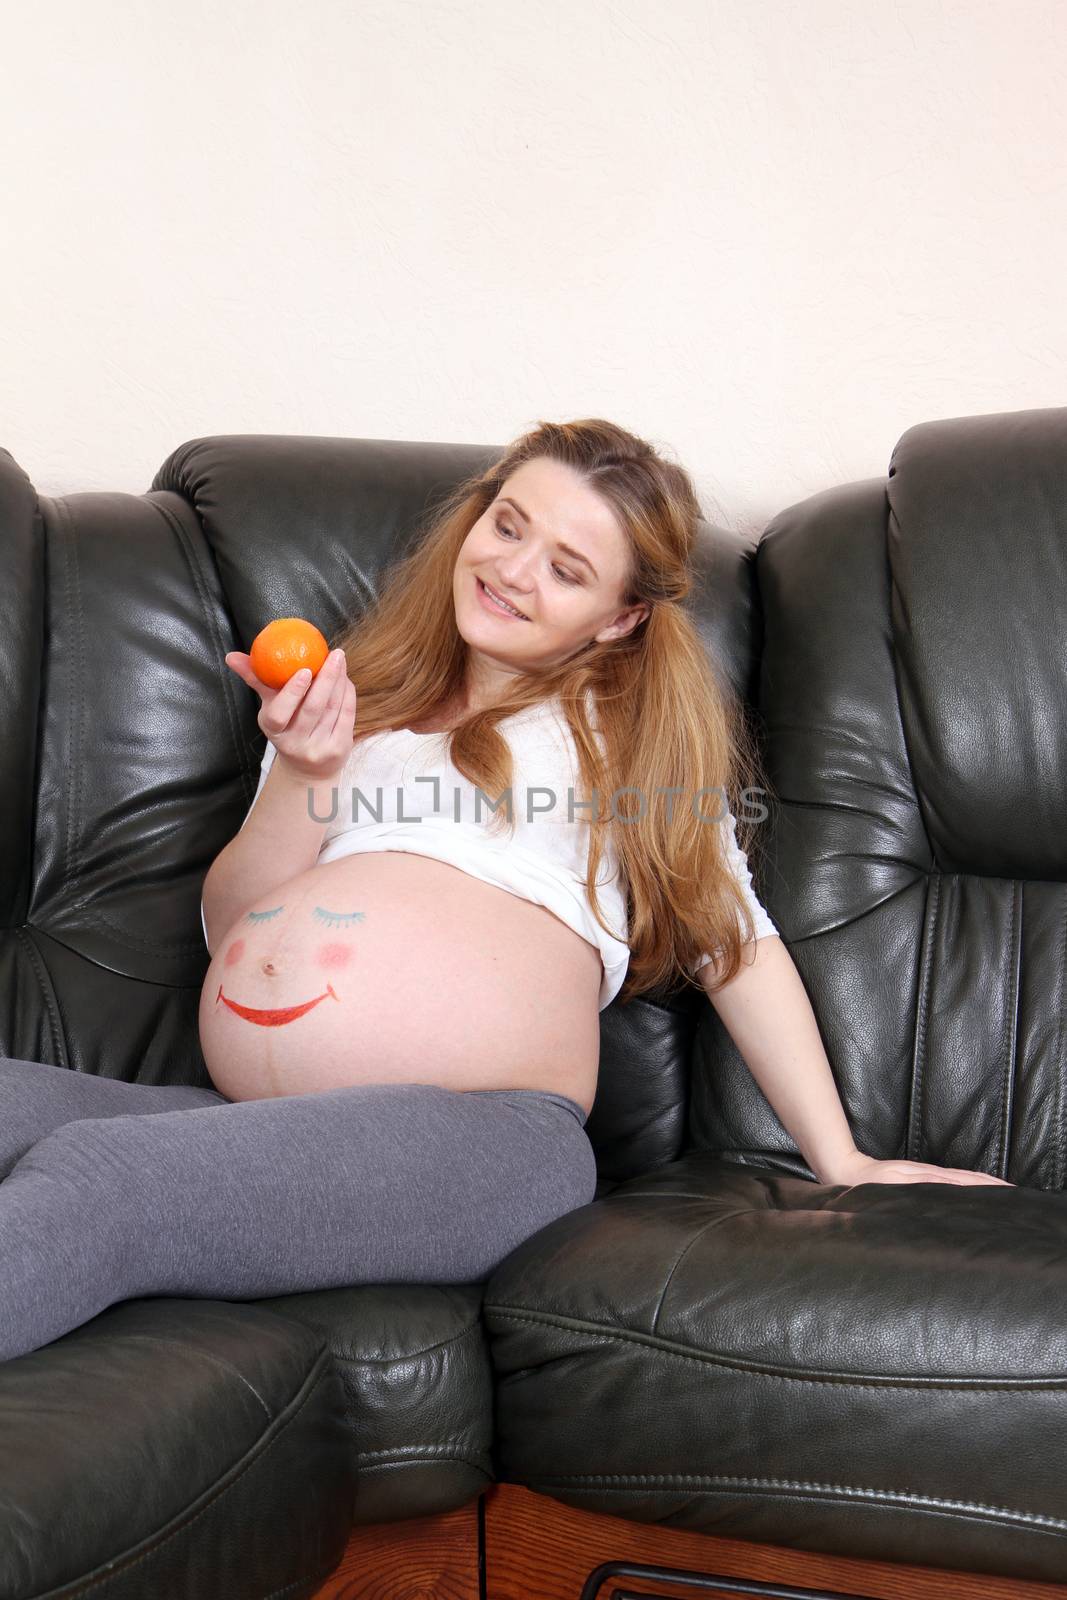 Pregnant woman with a painted face on a stomach sleeper by Irina1977